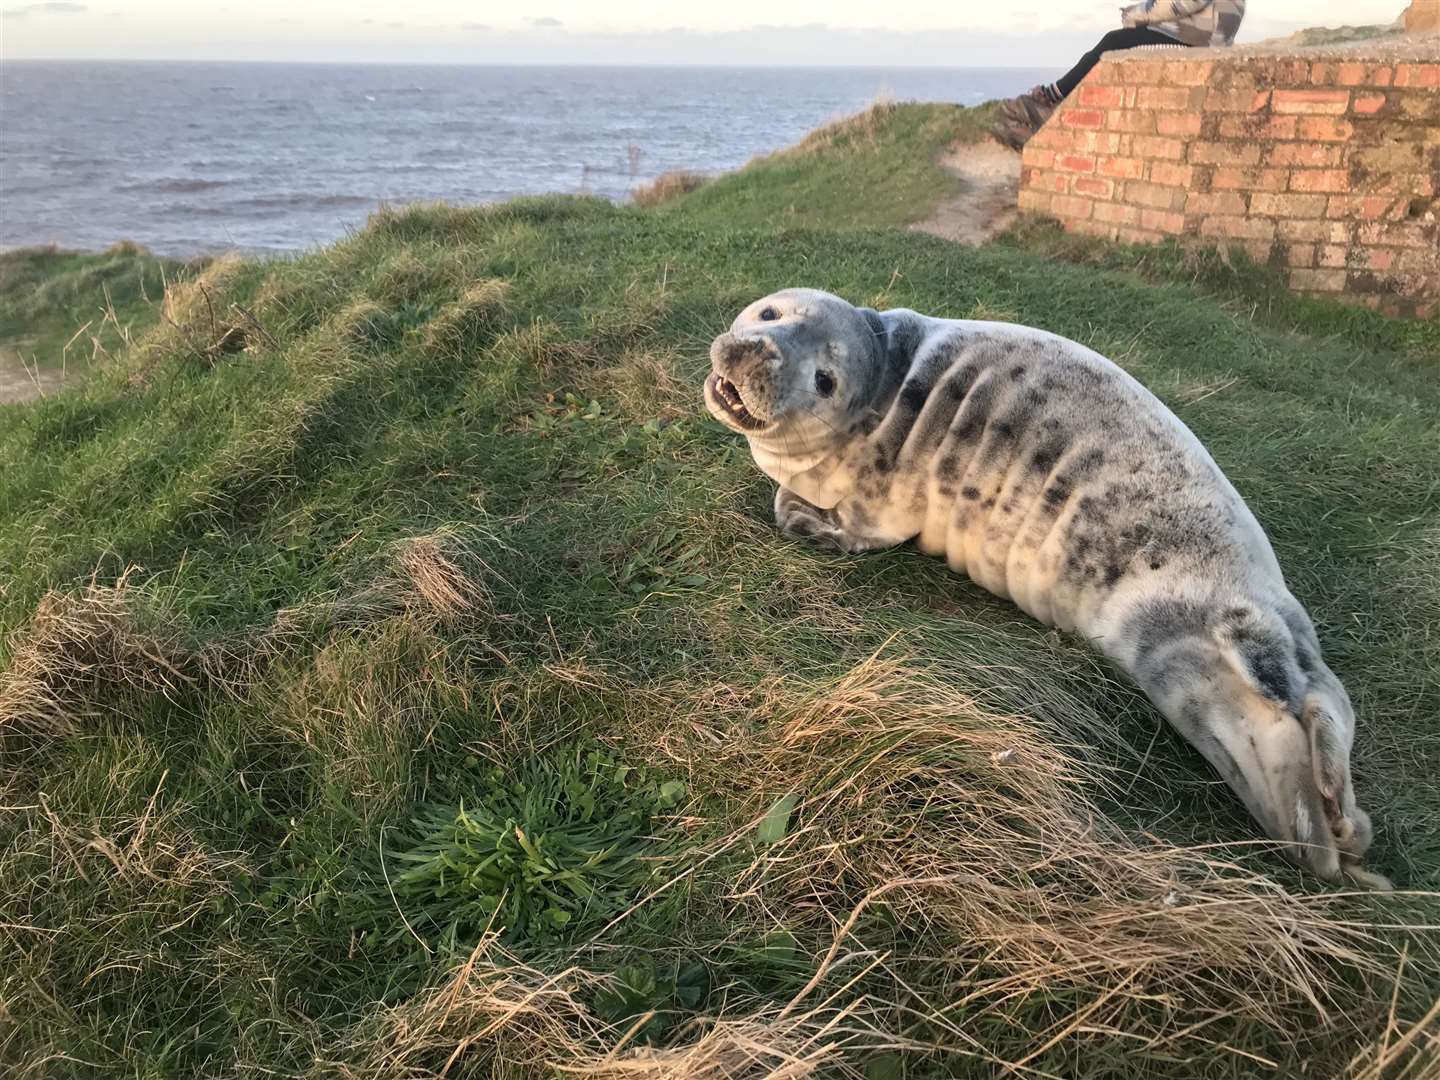 The seal pup had climbed up 50ft from the beach onto a cliff (RSPCA)